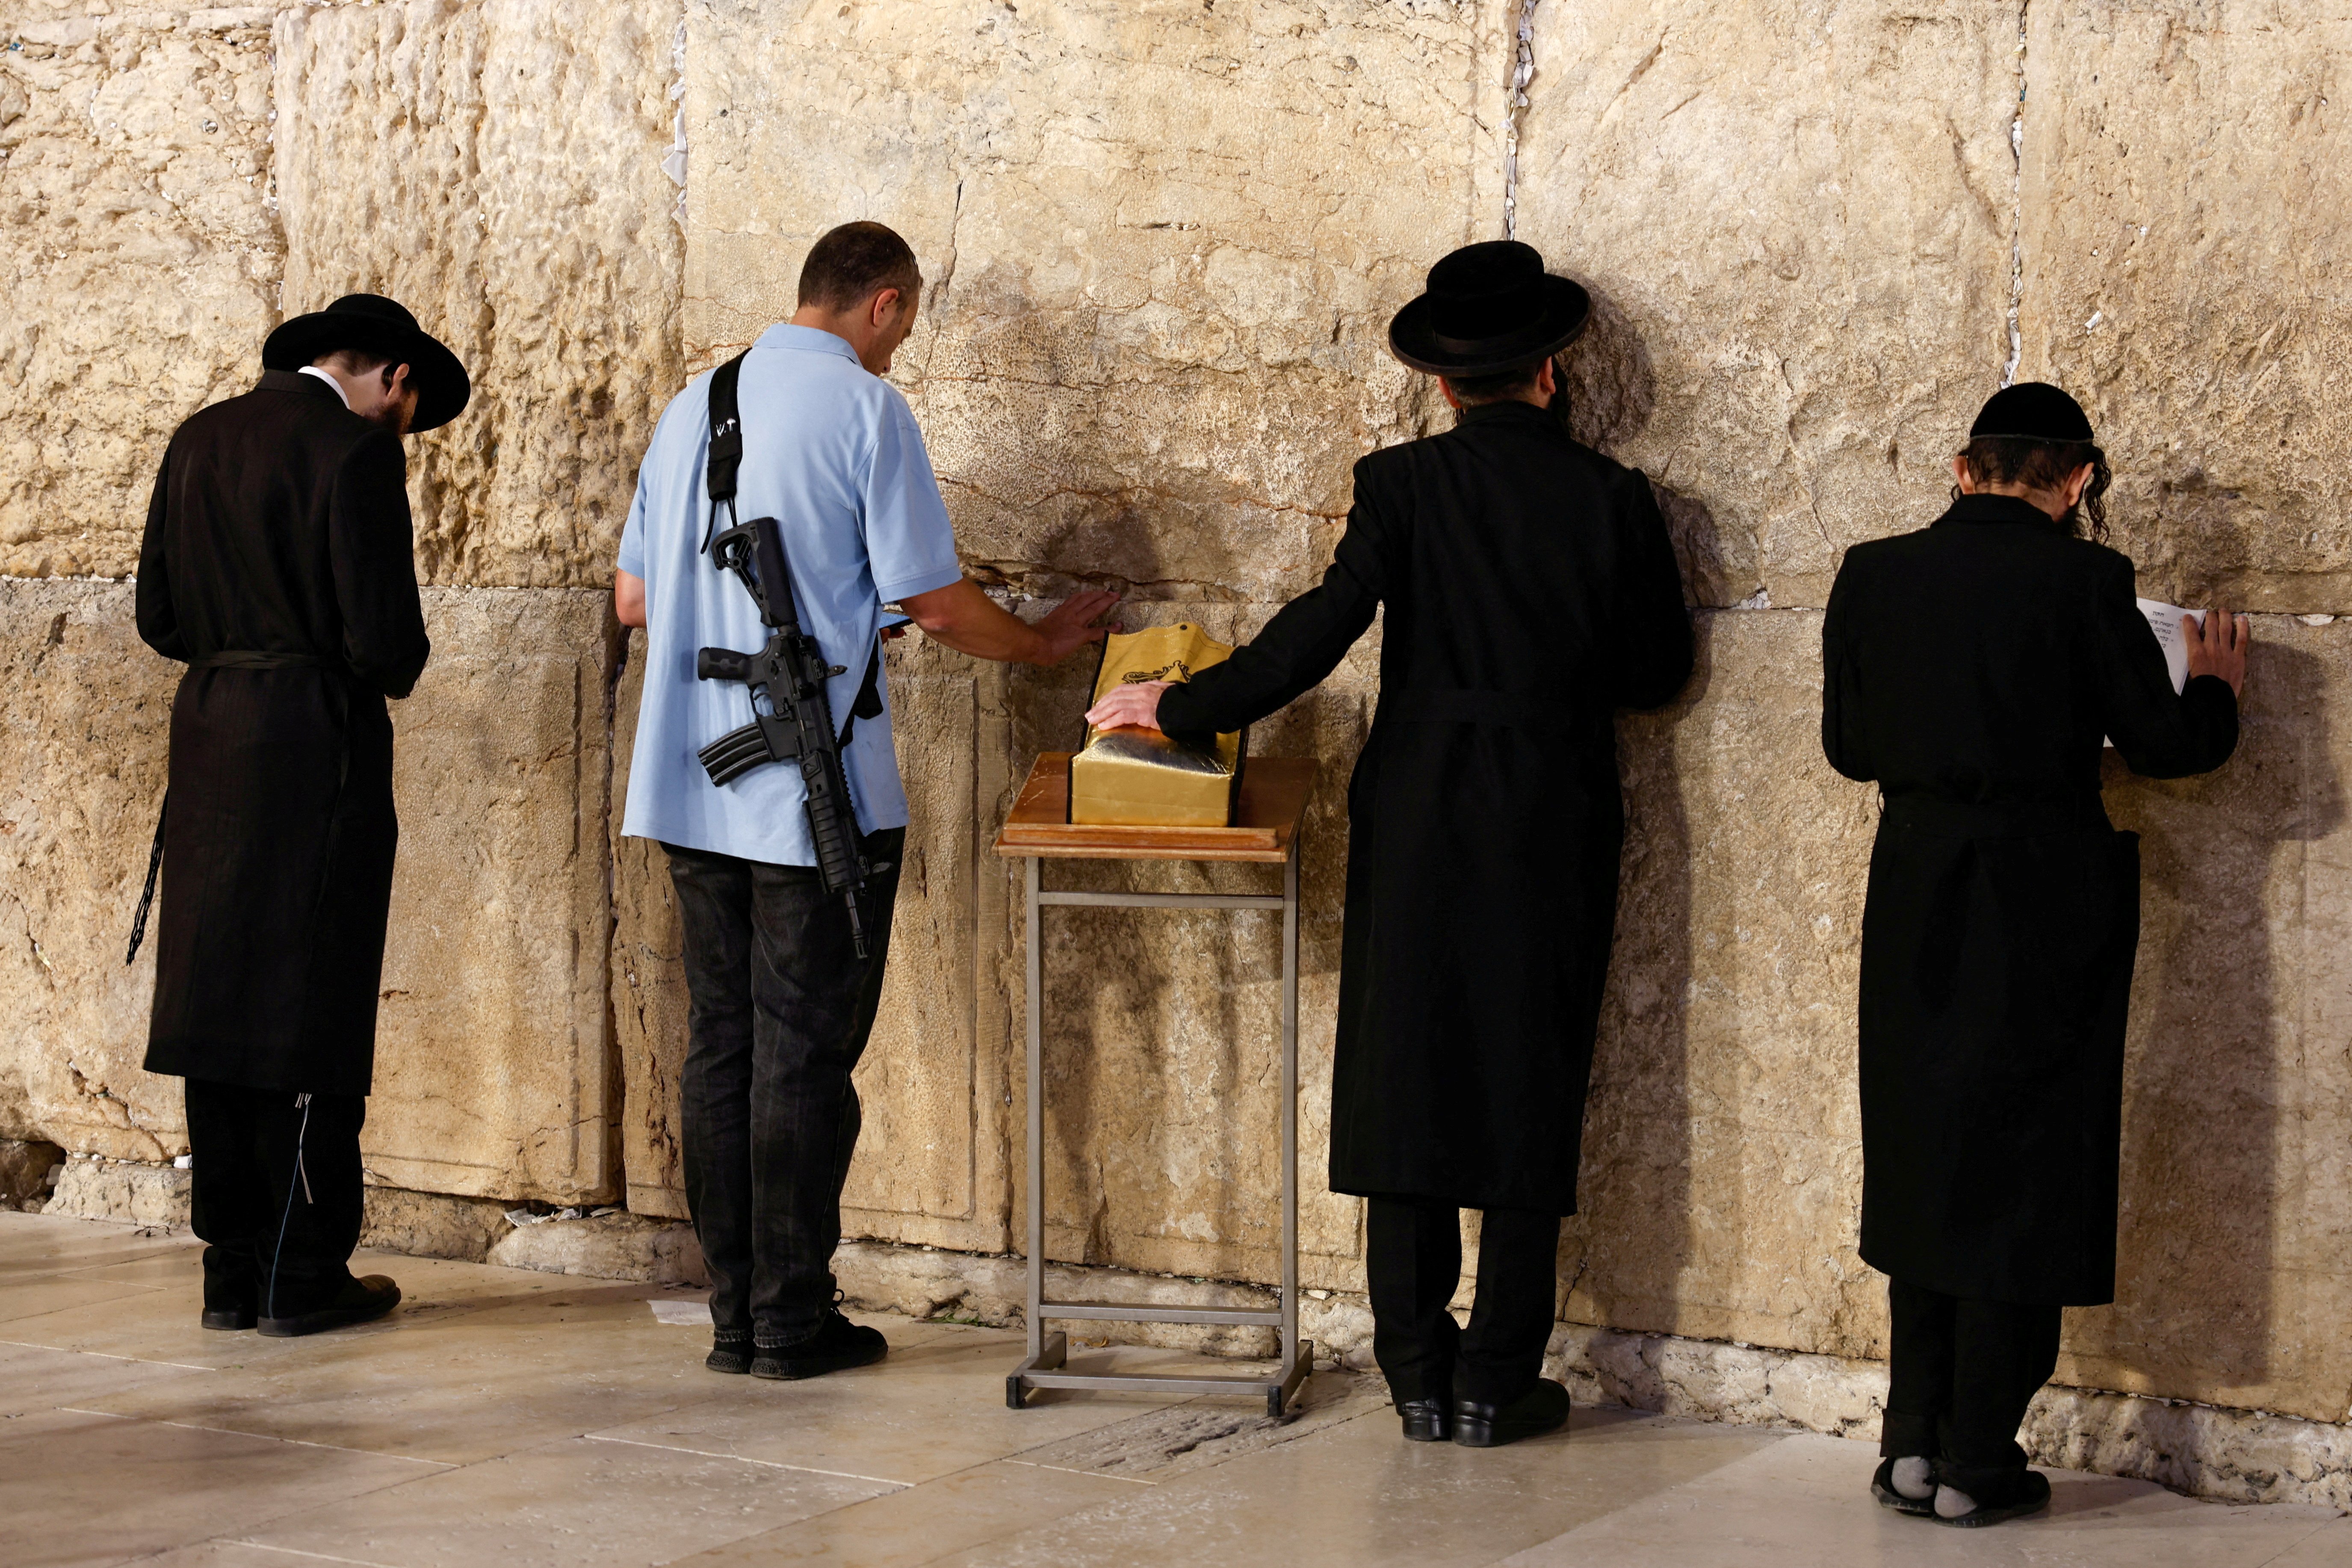 Jewish worshippers pray Nov. 6 at the Western Wall in the Old City of Jerusalem.